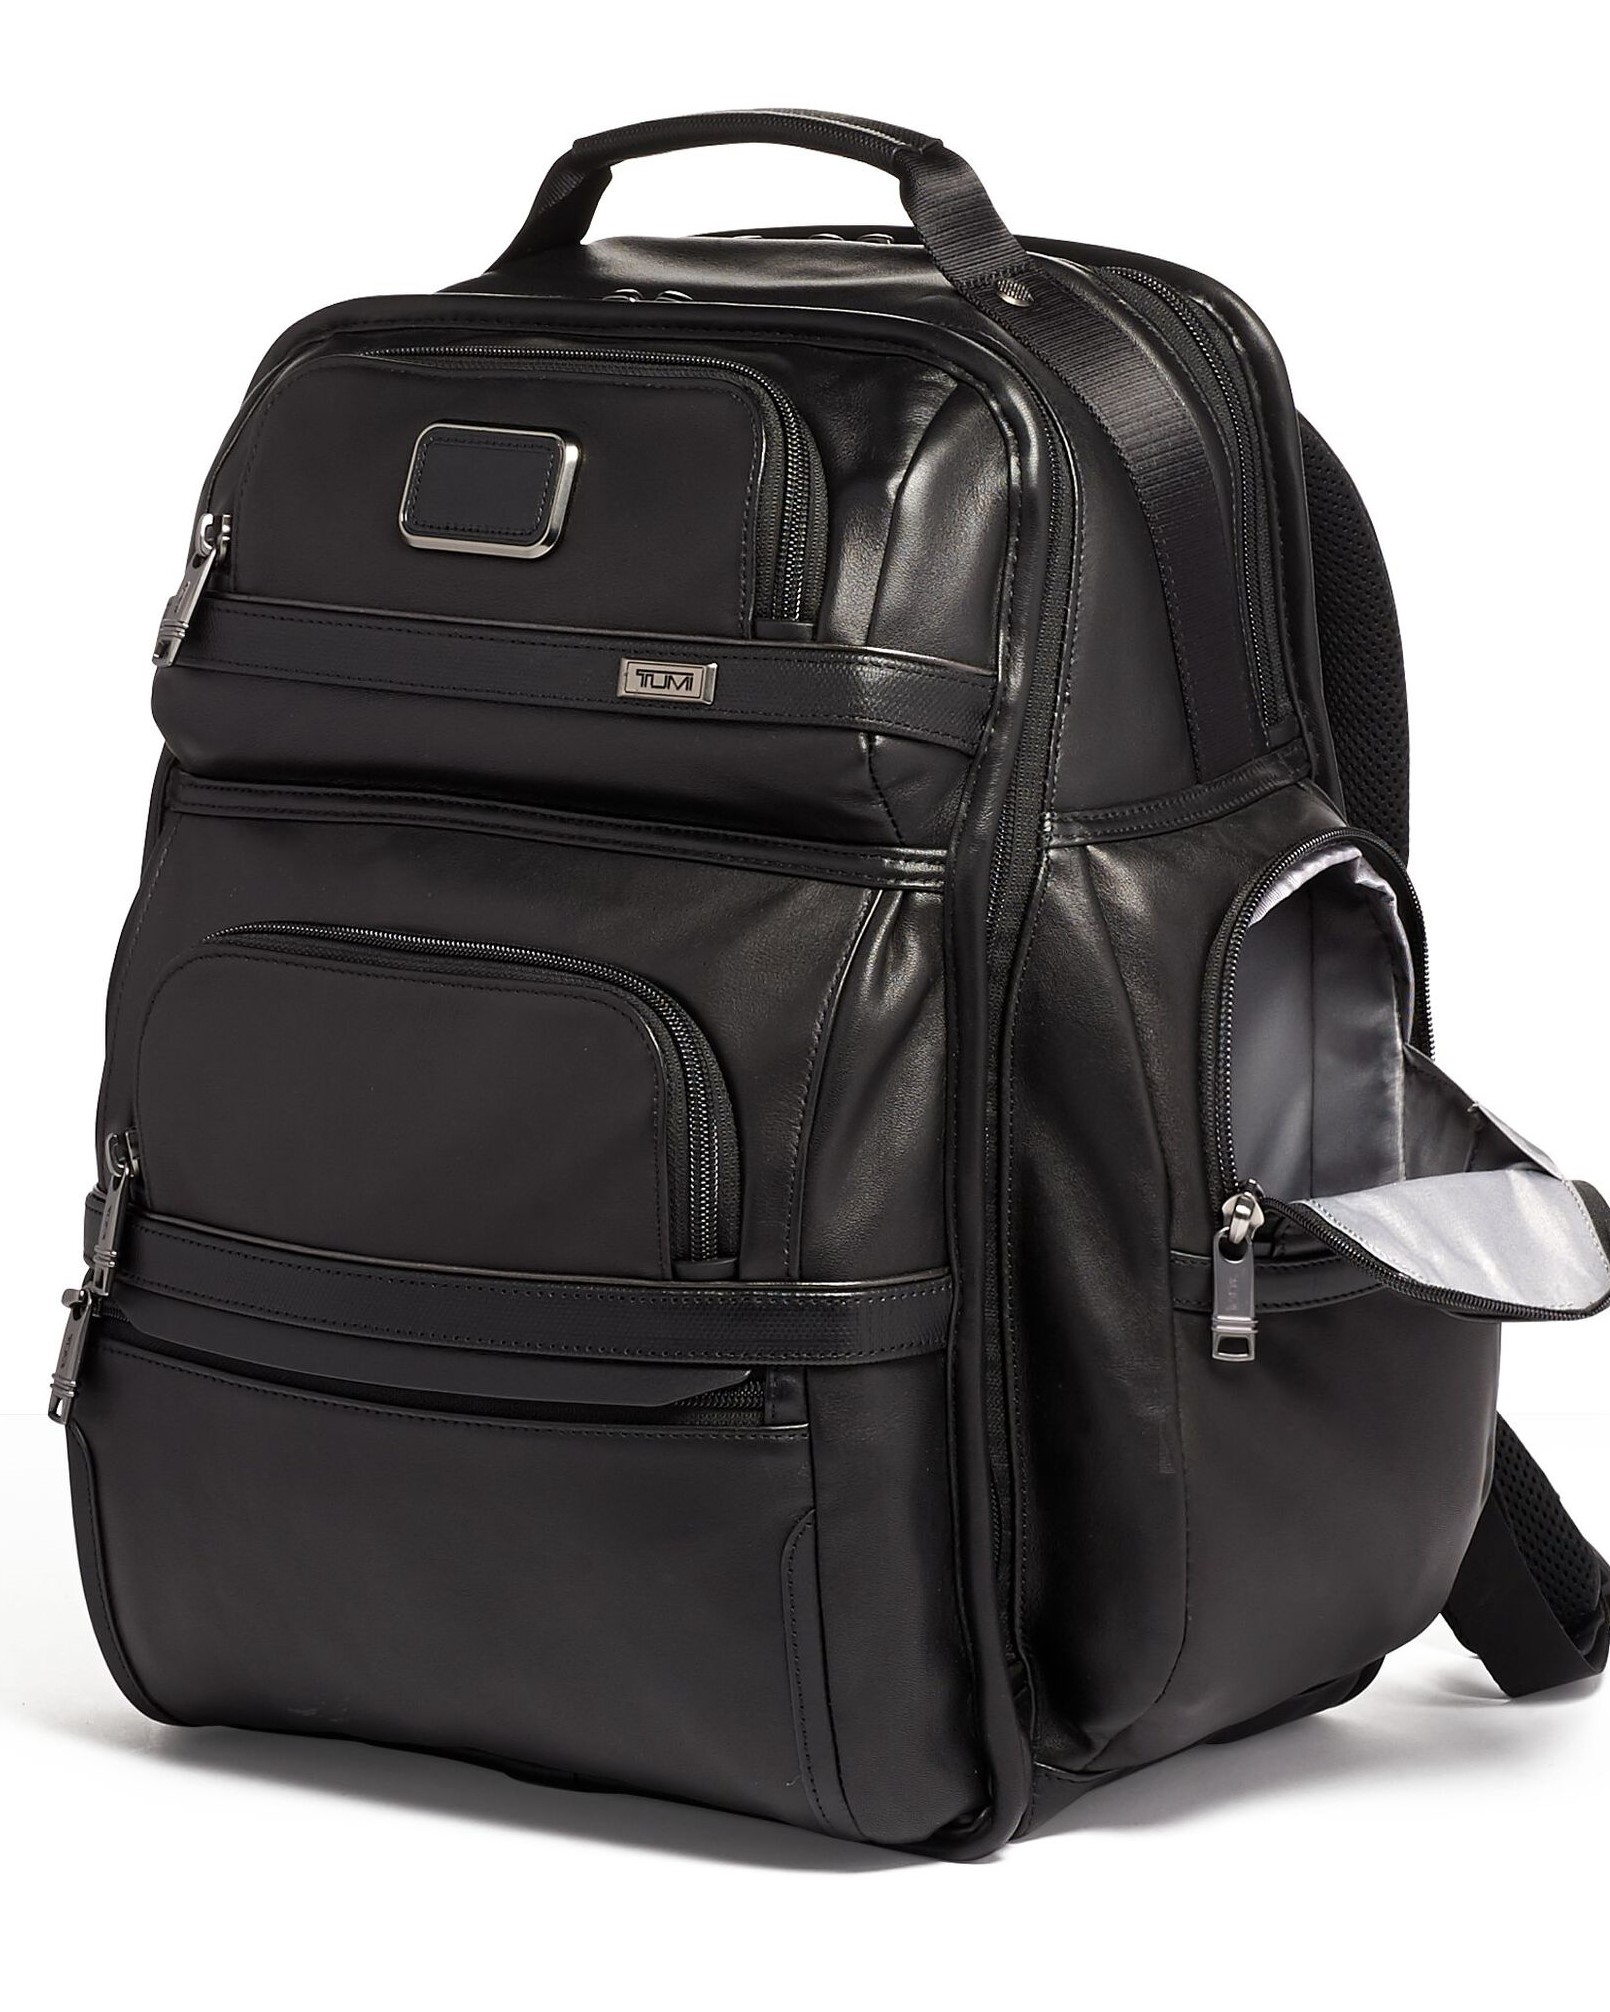 BALO DA NAM TUMI ALPHA 3 T-PASS BUSINESS CLASS BRIEF PACK LEATHER BACKPACK 5